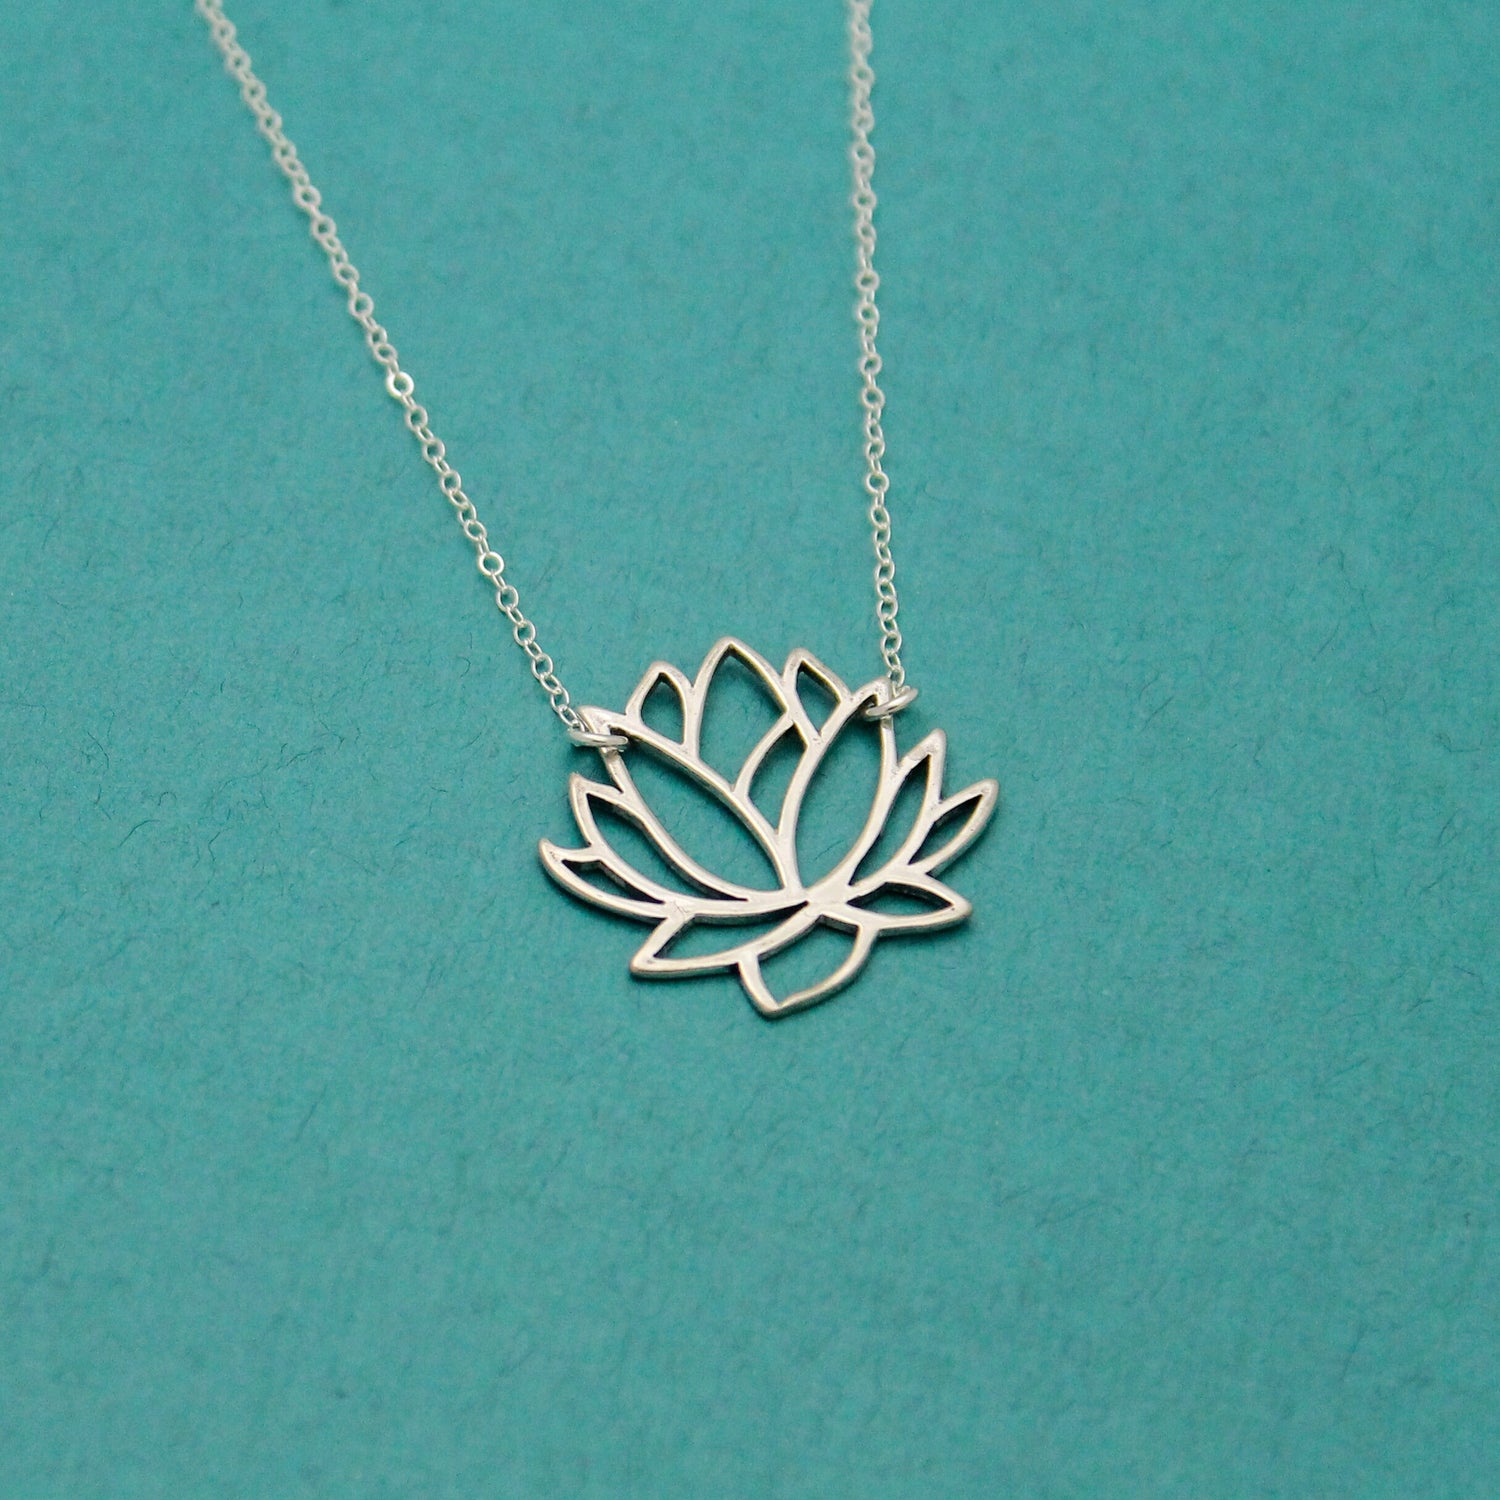 Sterling Silver LOTUS Necklace, Lotus Flower Necklace, Flower Bar Necklace, Lotus Bar Necklace, Yoga Boho Jewelry, Hand Stamped Jewelry